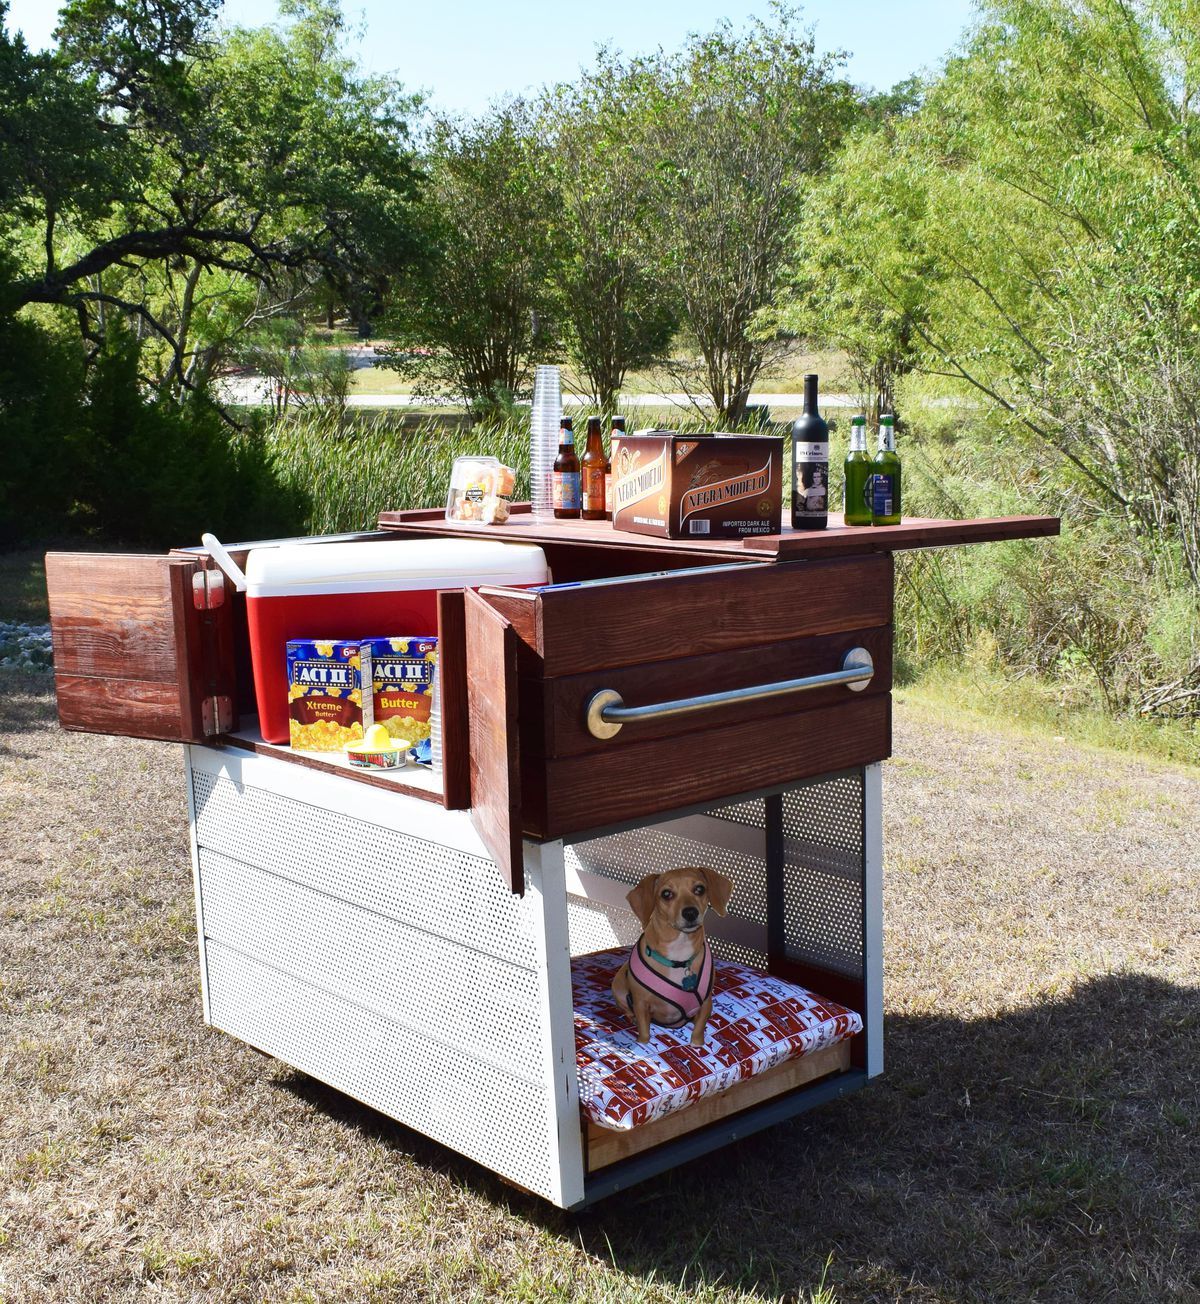 A two-tiered rolling cart. The bottom has perforated metal walls painted white, with a small dog on a pillow inside. The top is wood and designed to serve as a bar or serving area. There are popcorn boxes and beer bottles on top.